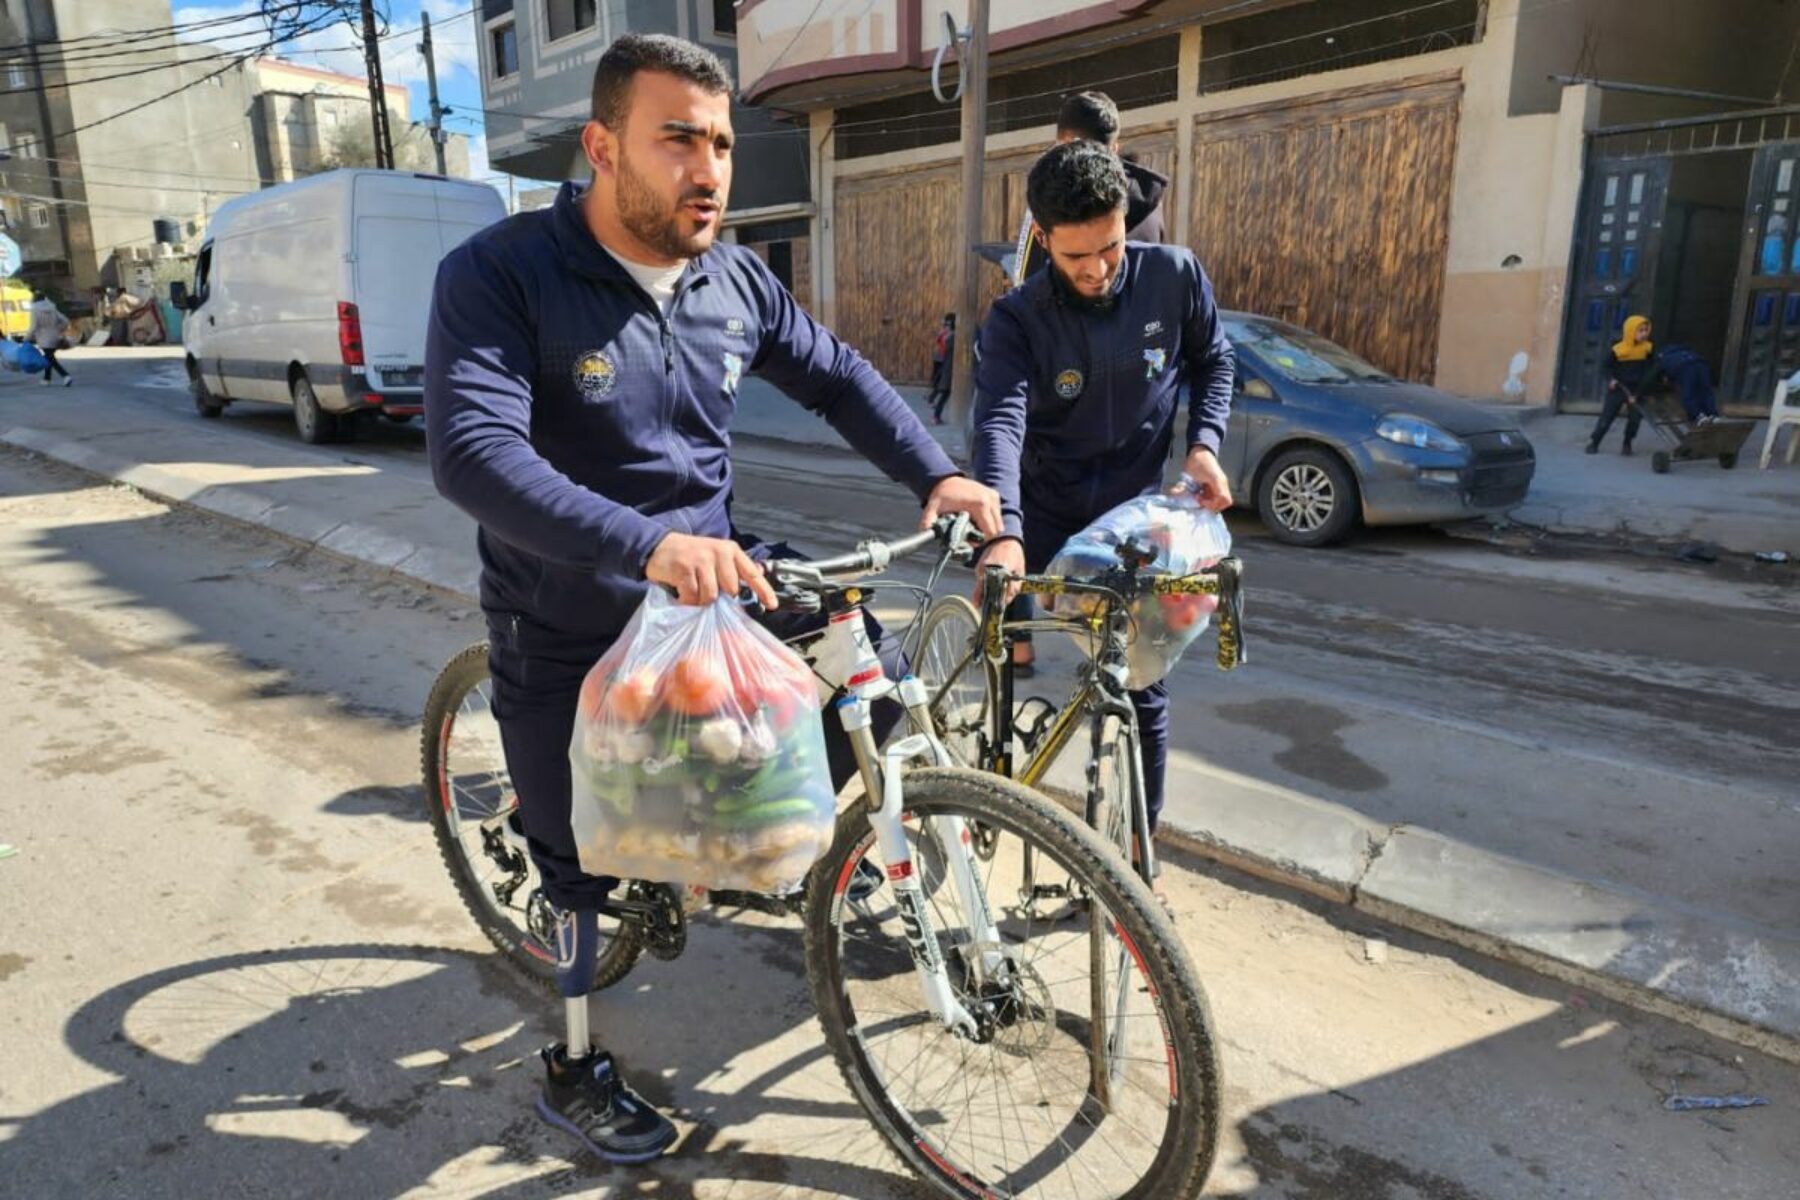 The para-cyclists delivering aid to displaced Gazans against all odds